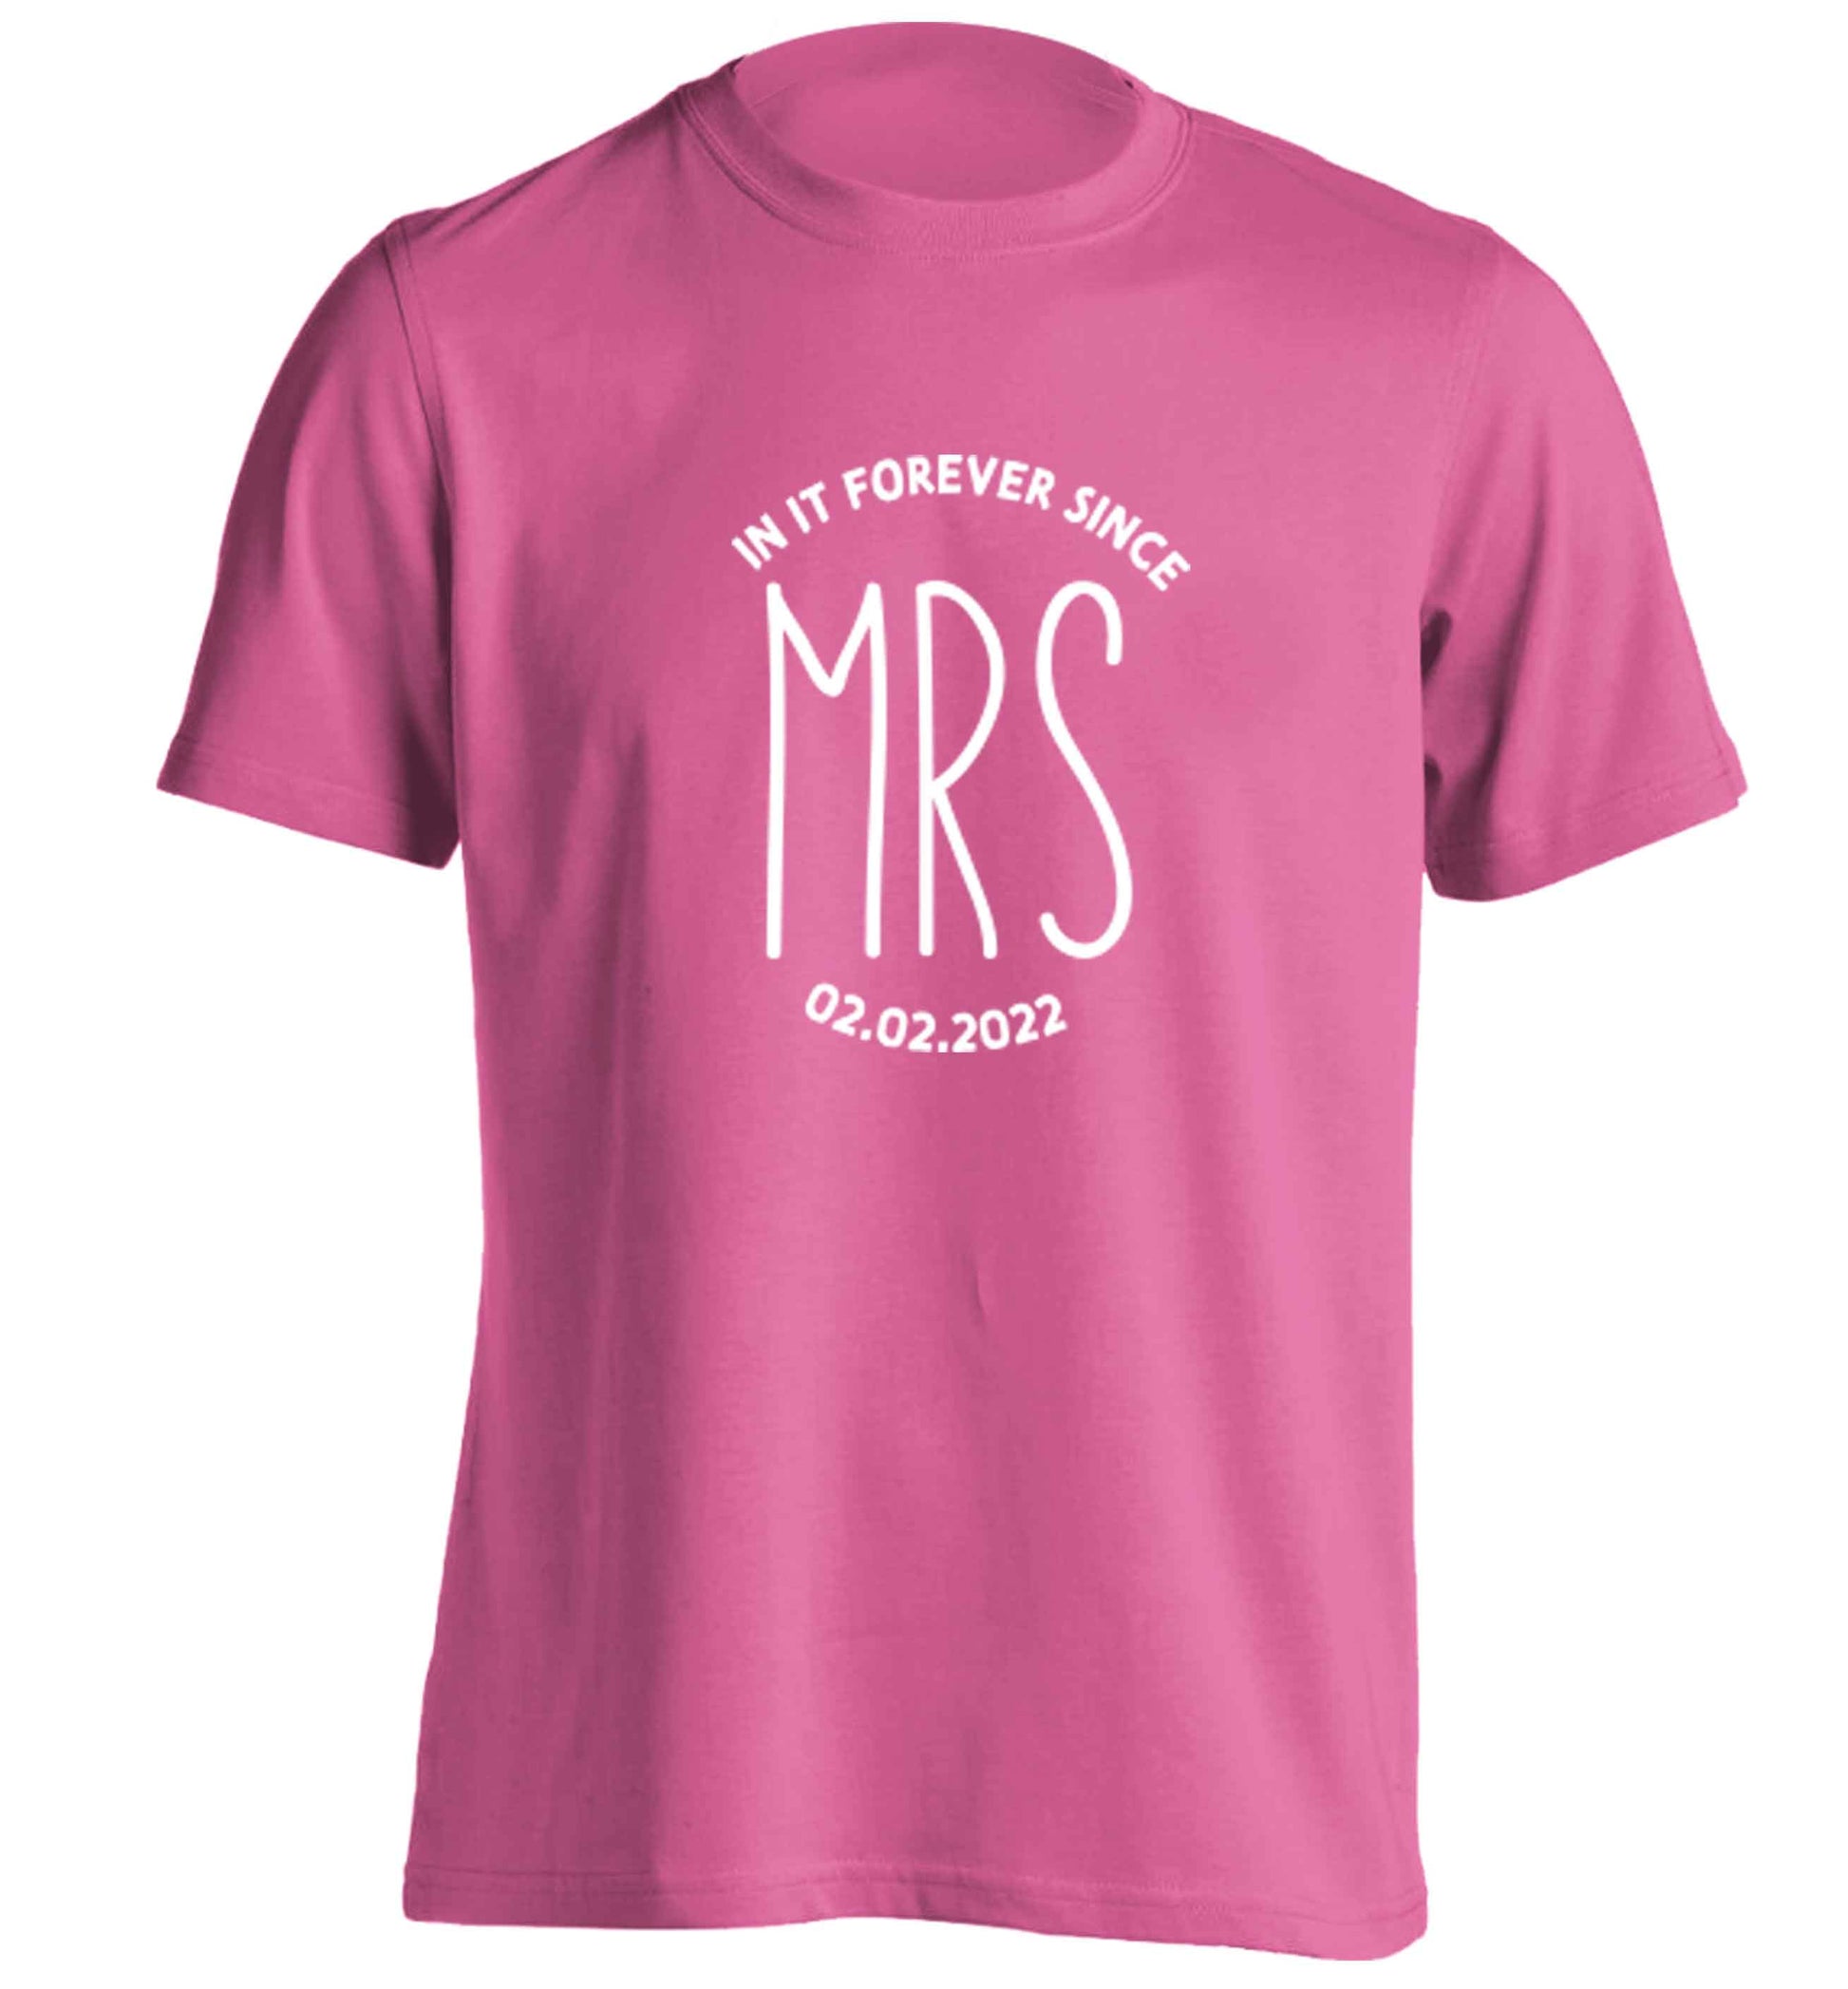 Funny matching gifts for him and her! Get matchy matchy, ideal for newlywed couples or a little valentines gift! adults unisex pink Tshirt 2XL